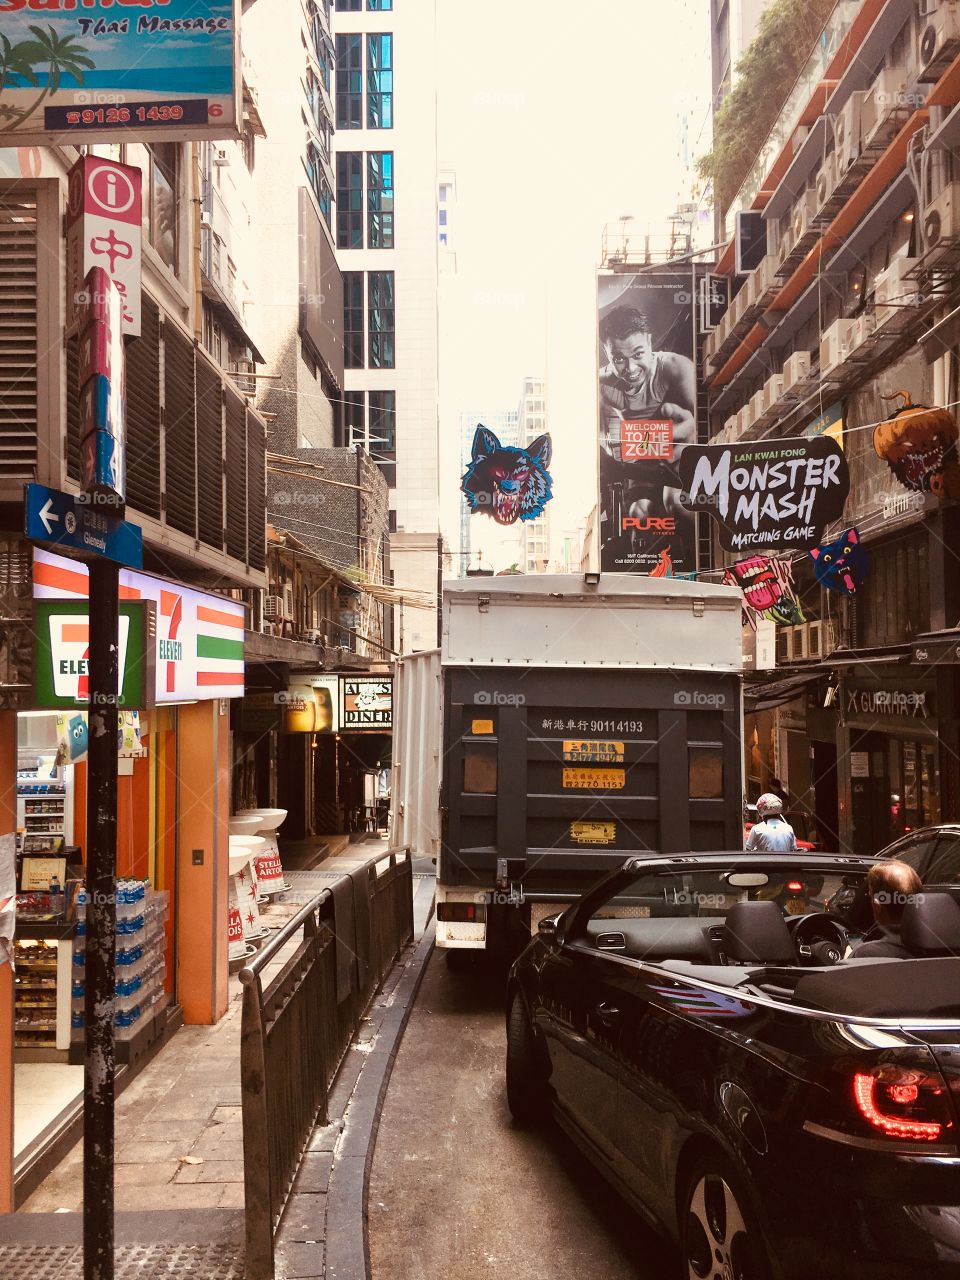 Hong Kong. Lights, energy, life, culture, history, tradition, excitement, adventure, hidden gems. Appreciated the grittiness is this back industrial road 